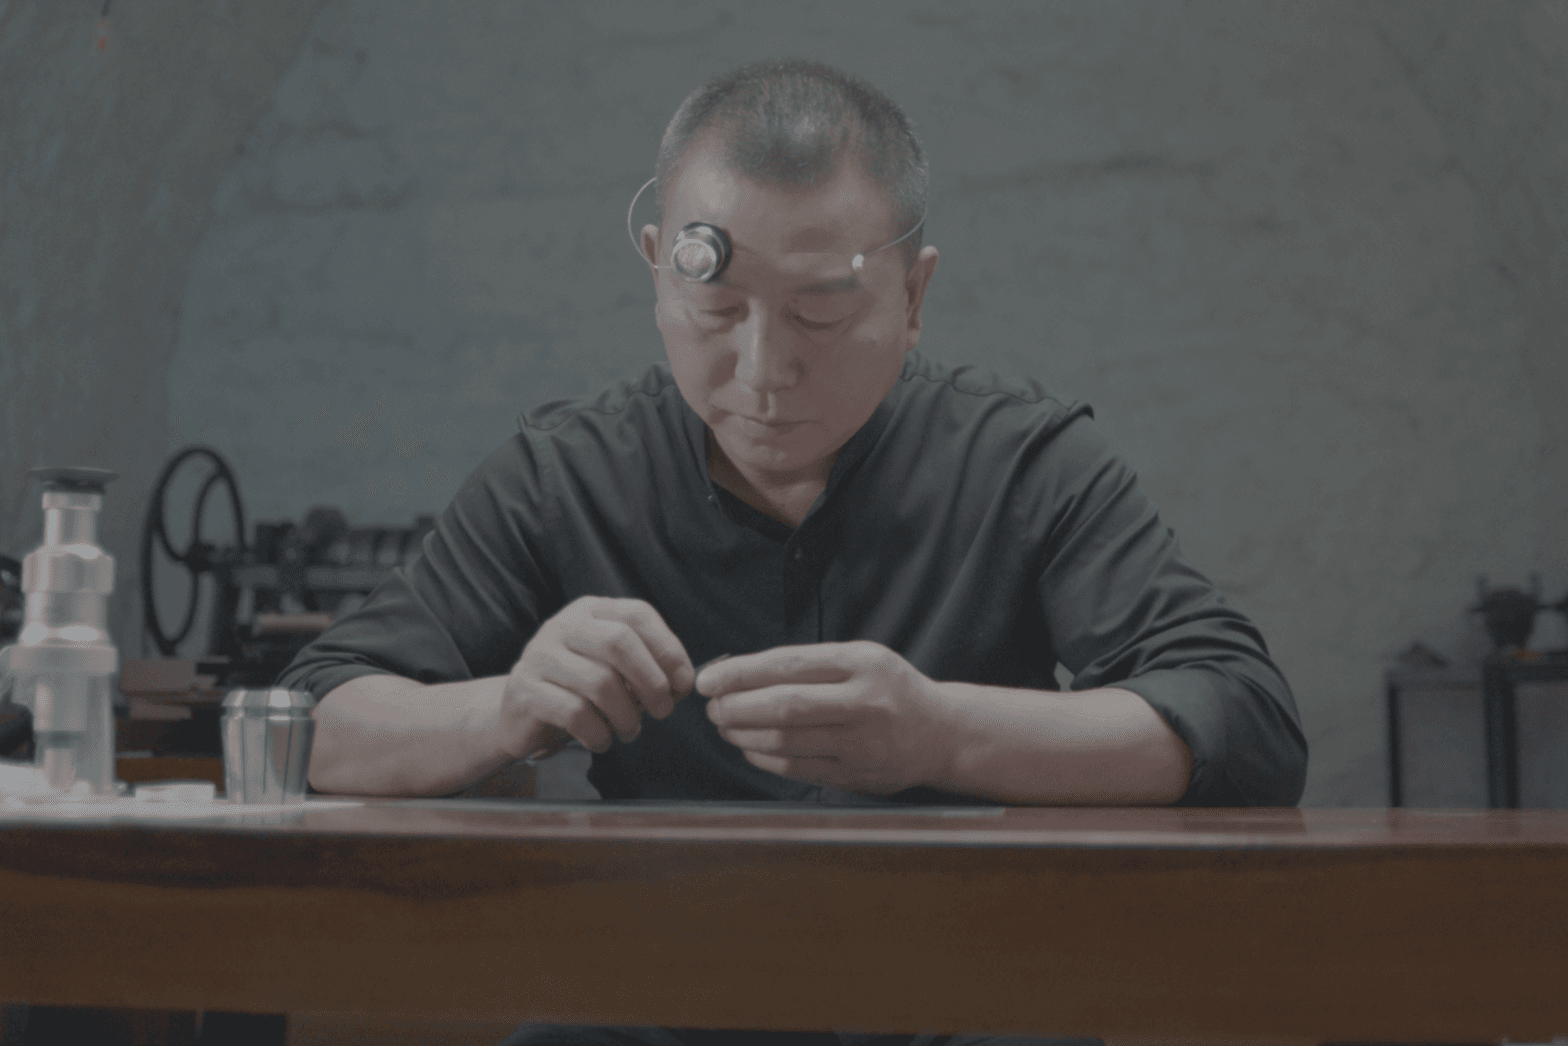 Mr. Cheng Yucai: an industrial machinist who built his own rose engines to study the craft of dial engraving